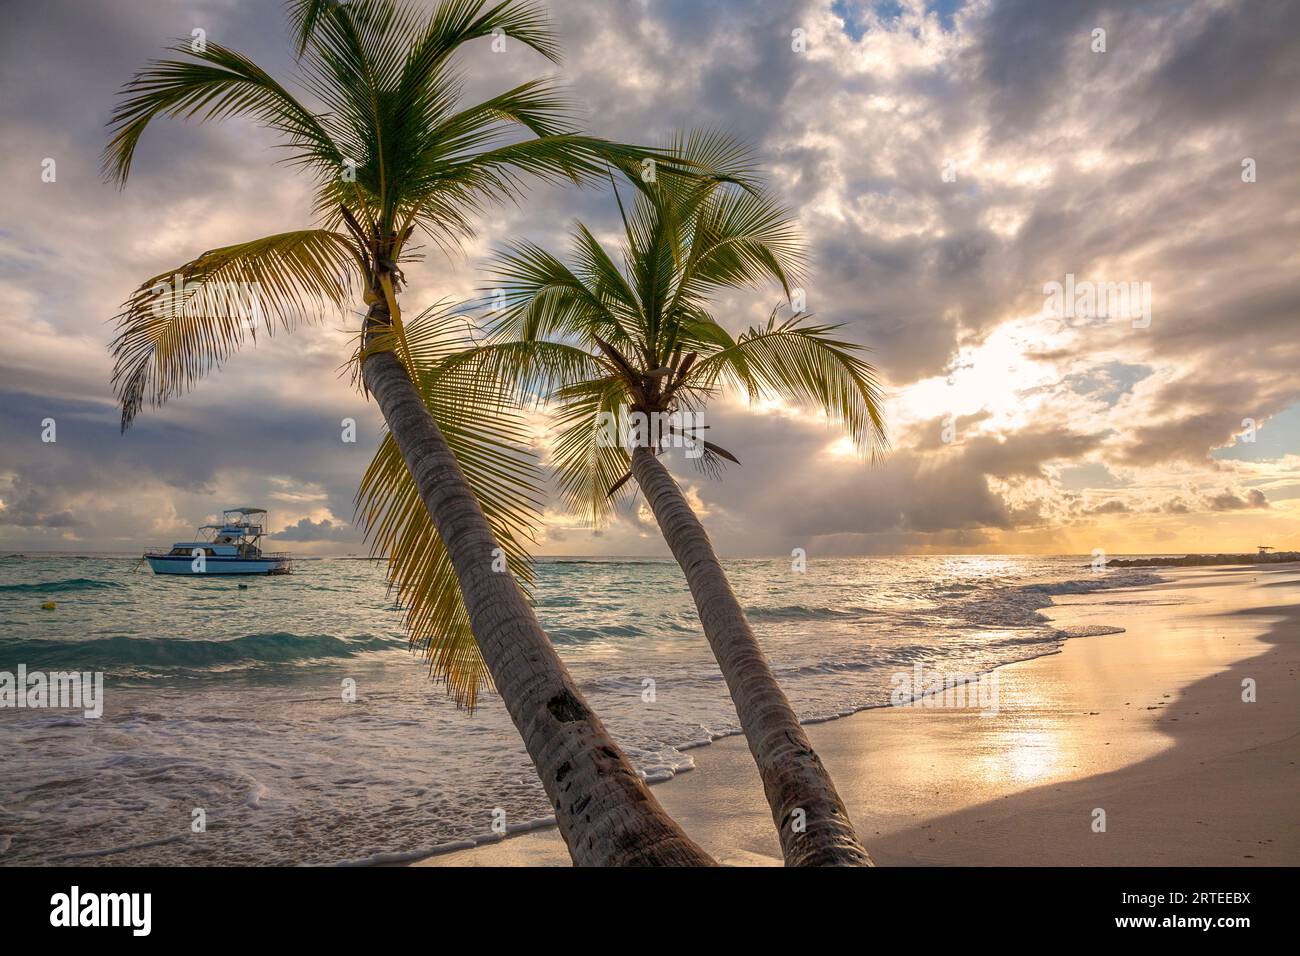 Close-up of palm tree with a yacht moored off shore and the turquoise water and foamy surf rolls onto the pristine white sand beach at twilight in ... Stock Photo